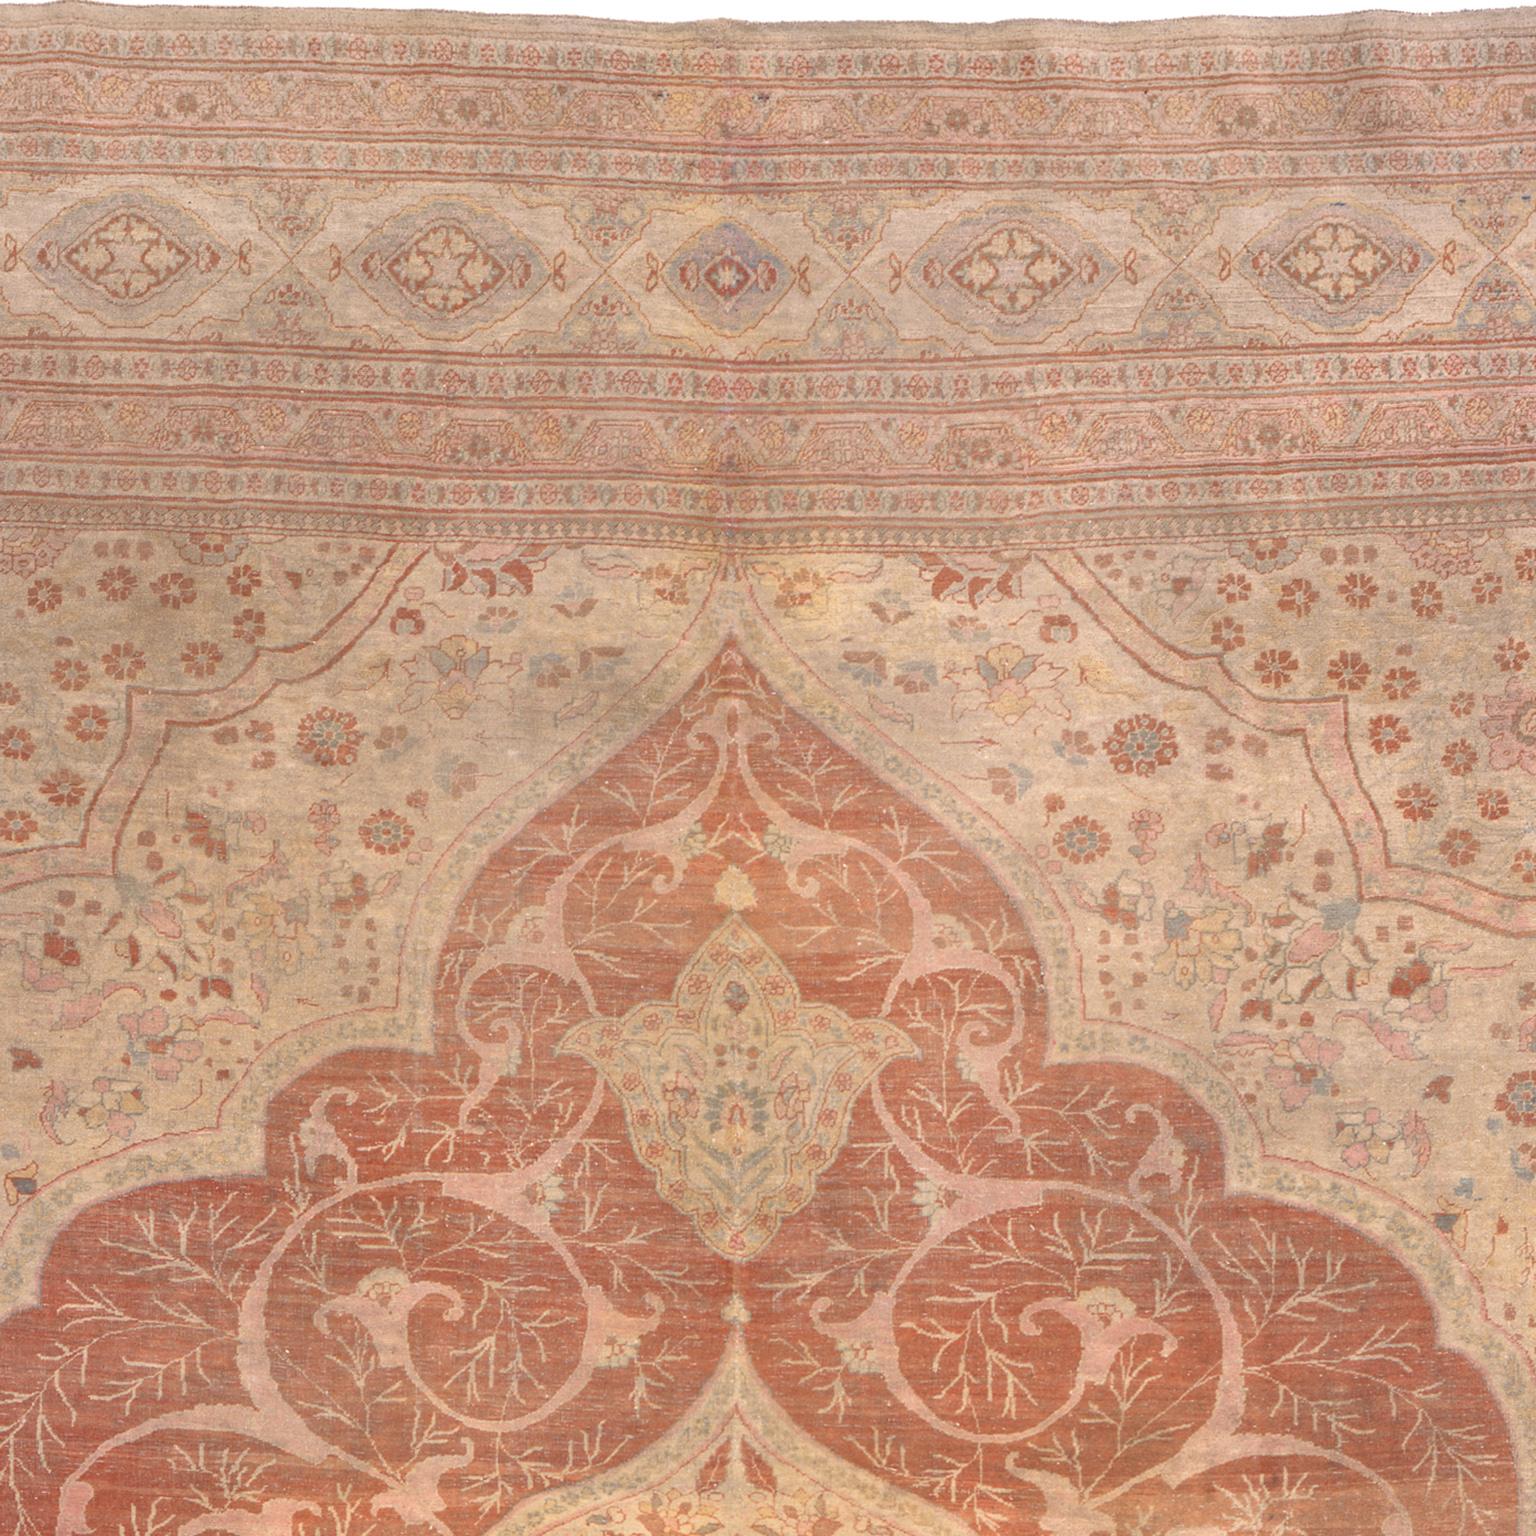 Late 19th Century Persian Tabriz Rug In Good Condition For Sale In New York, NY